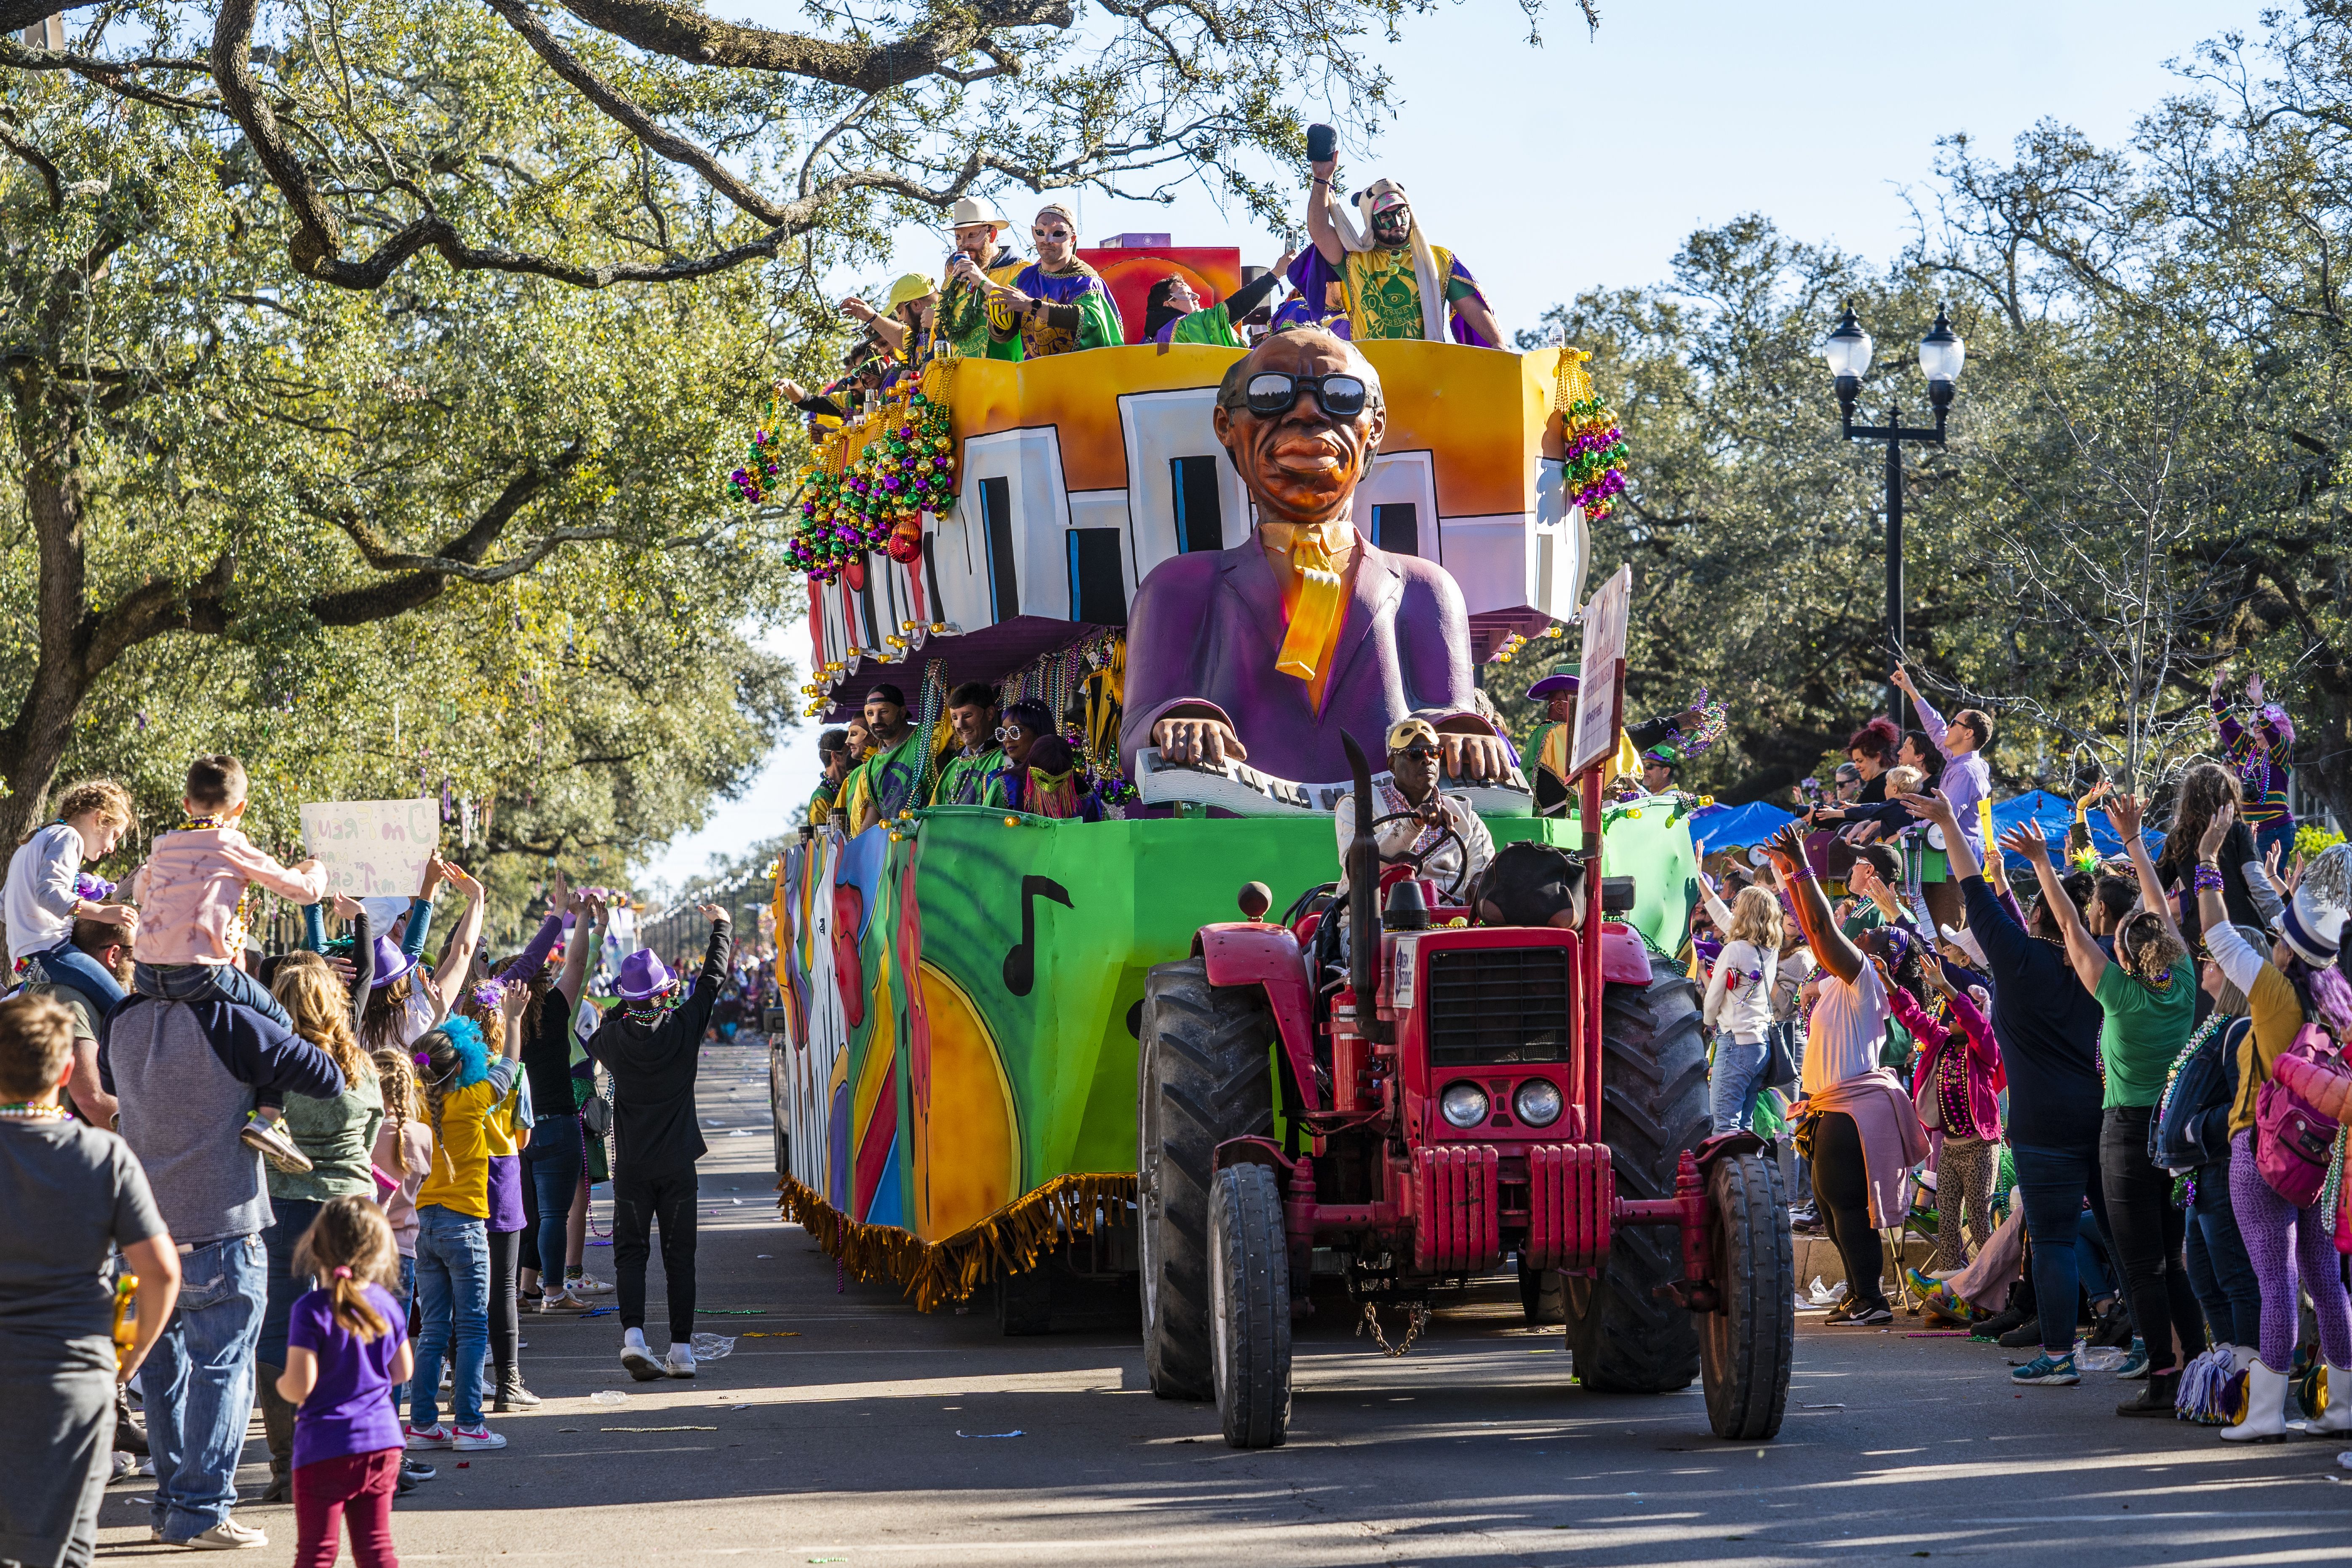 Photo shows a red tractor pulling a Mardi Gras float in New Orleans